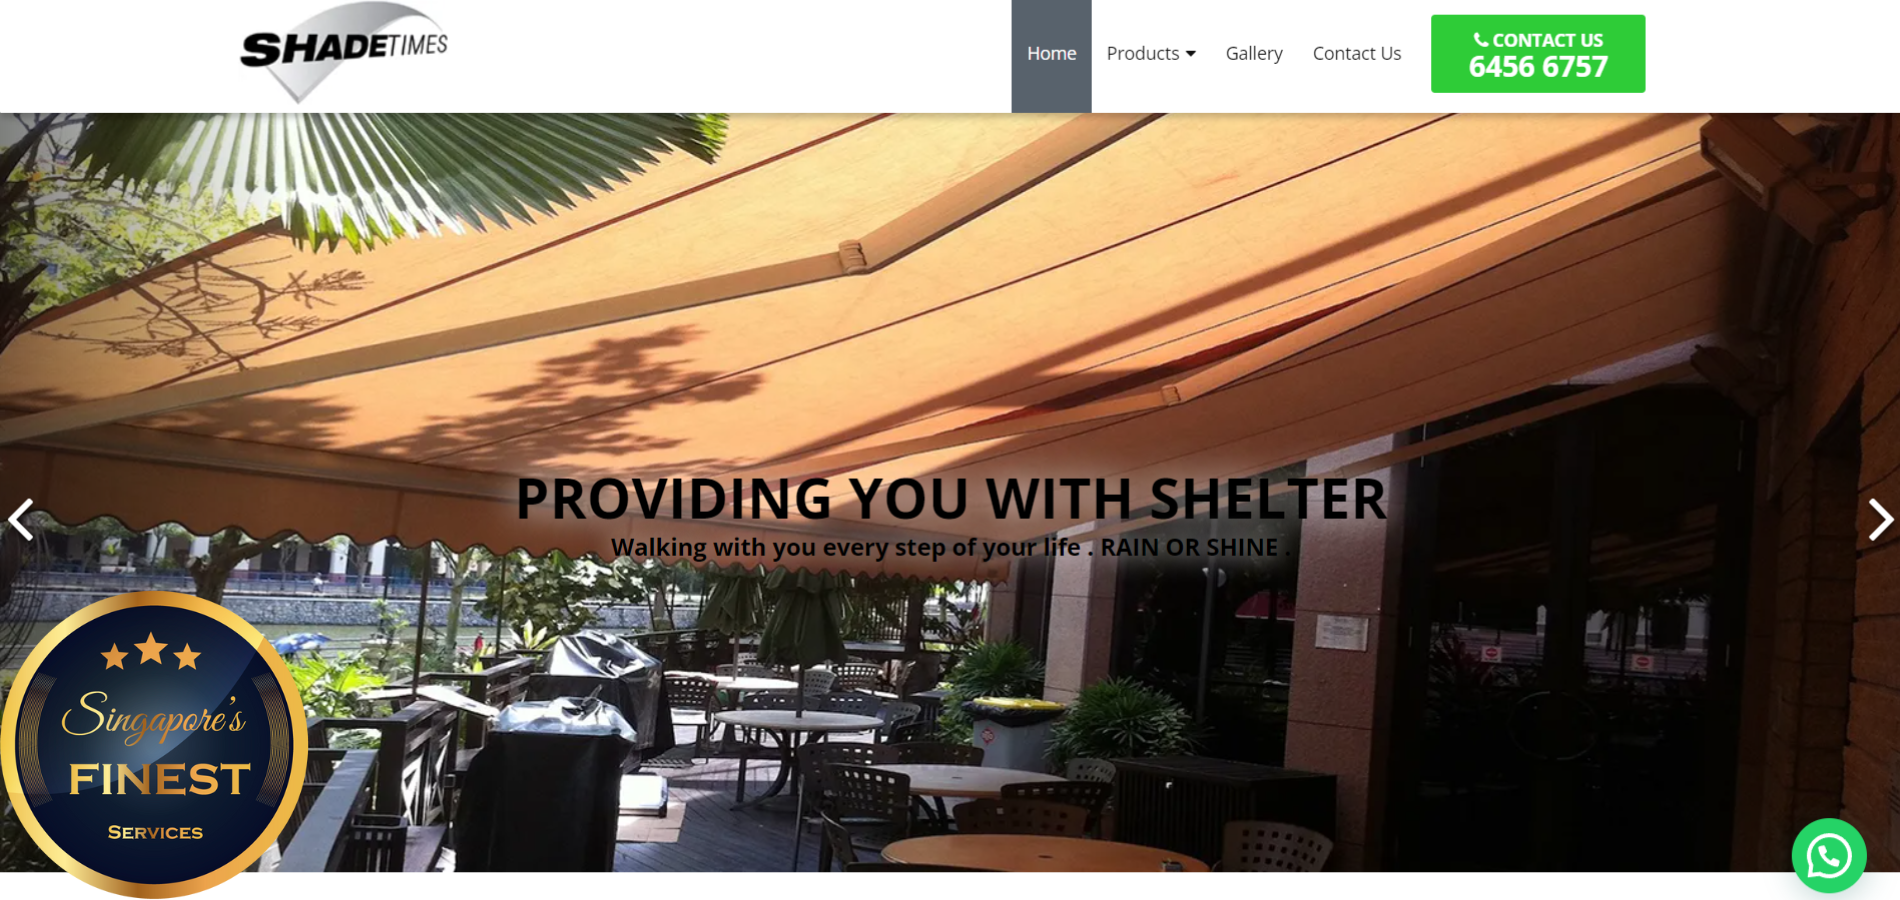 The Finest Awning Installers in Singapore